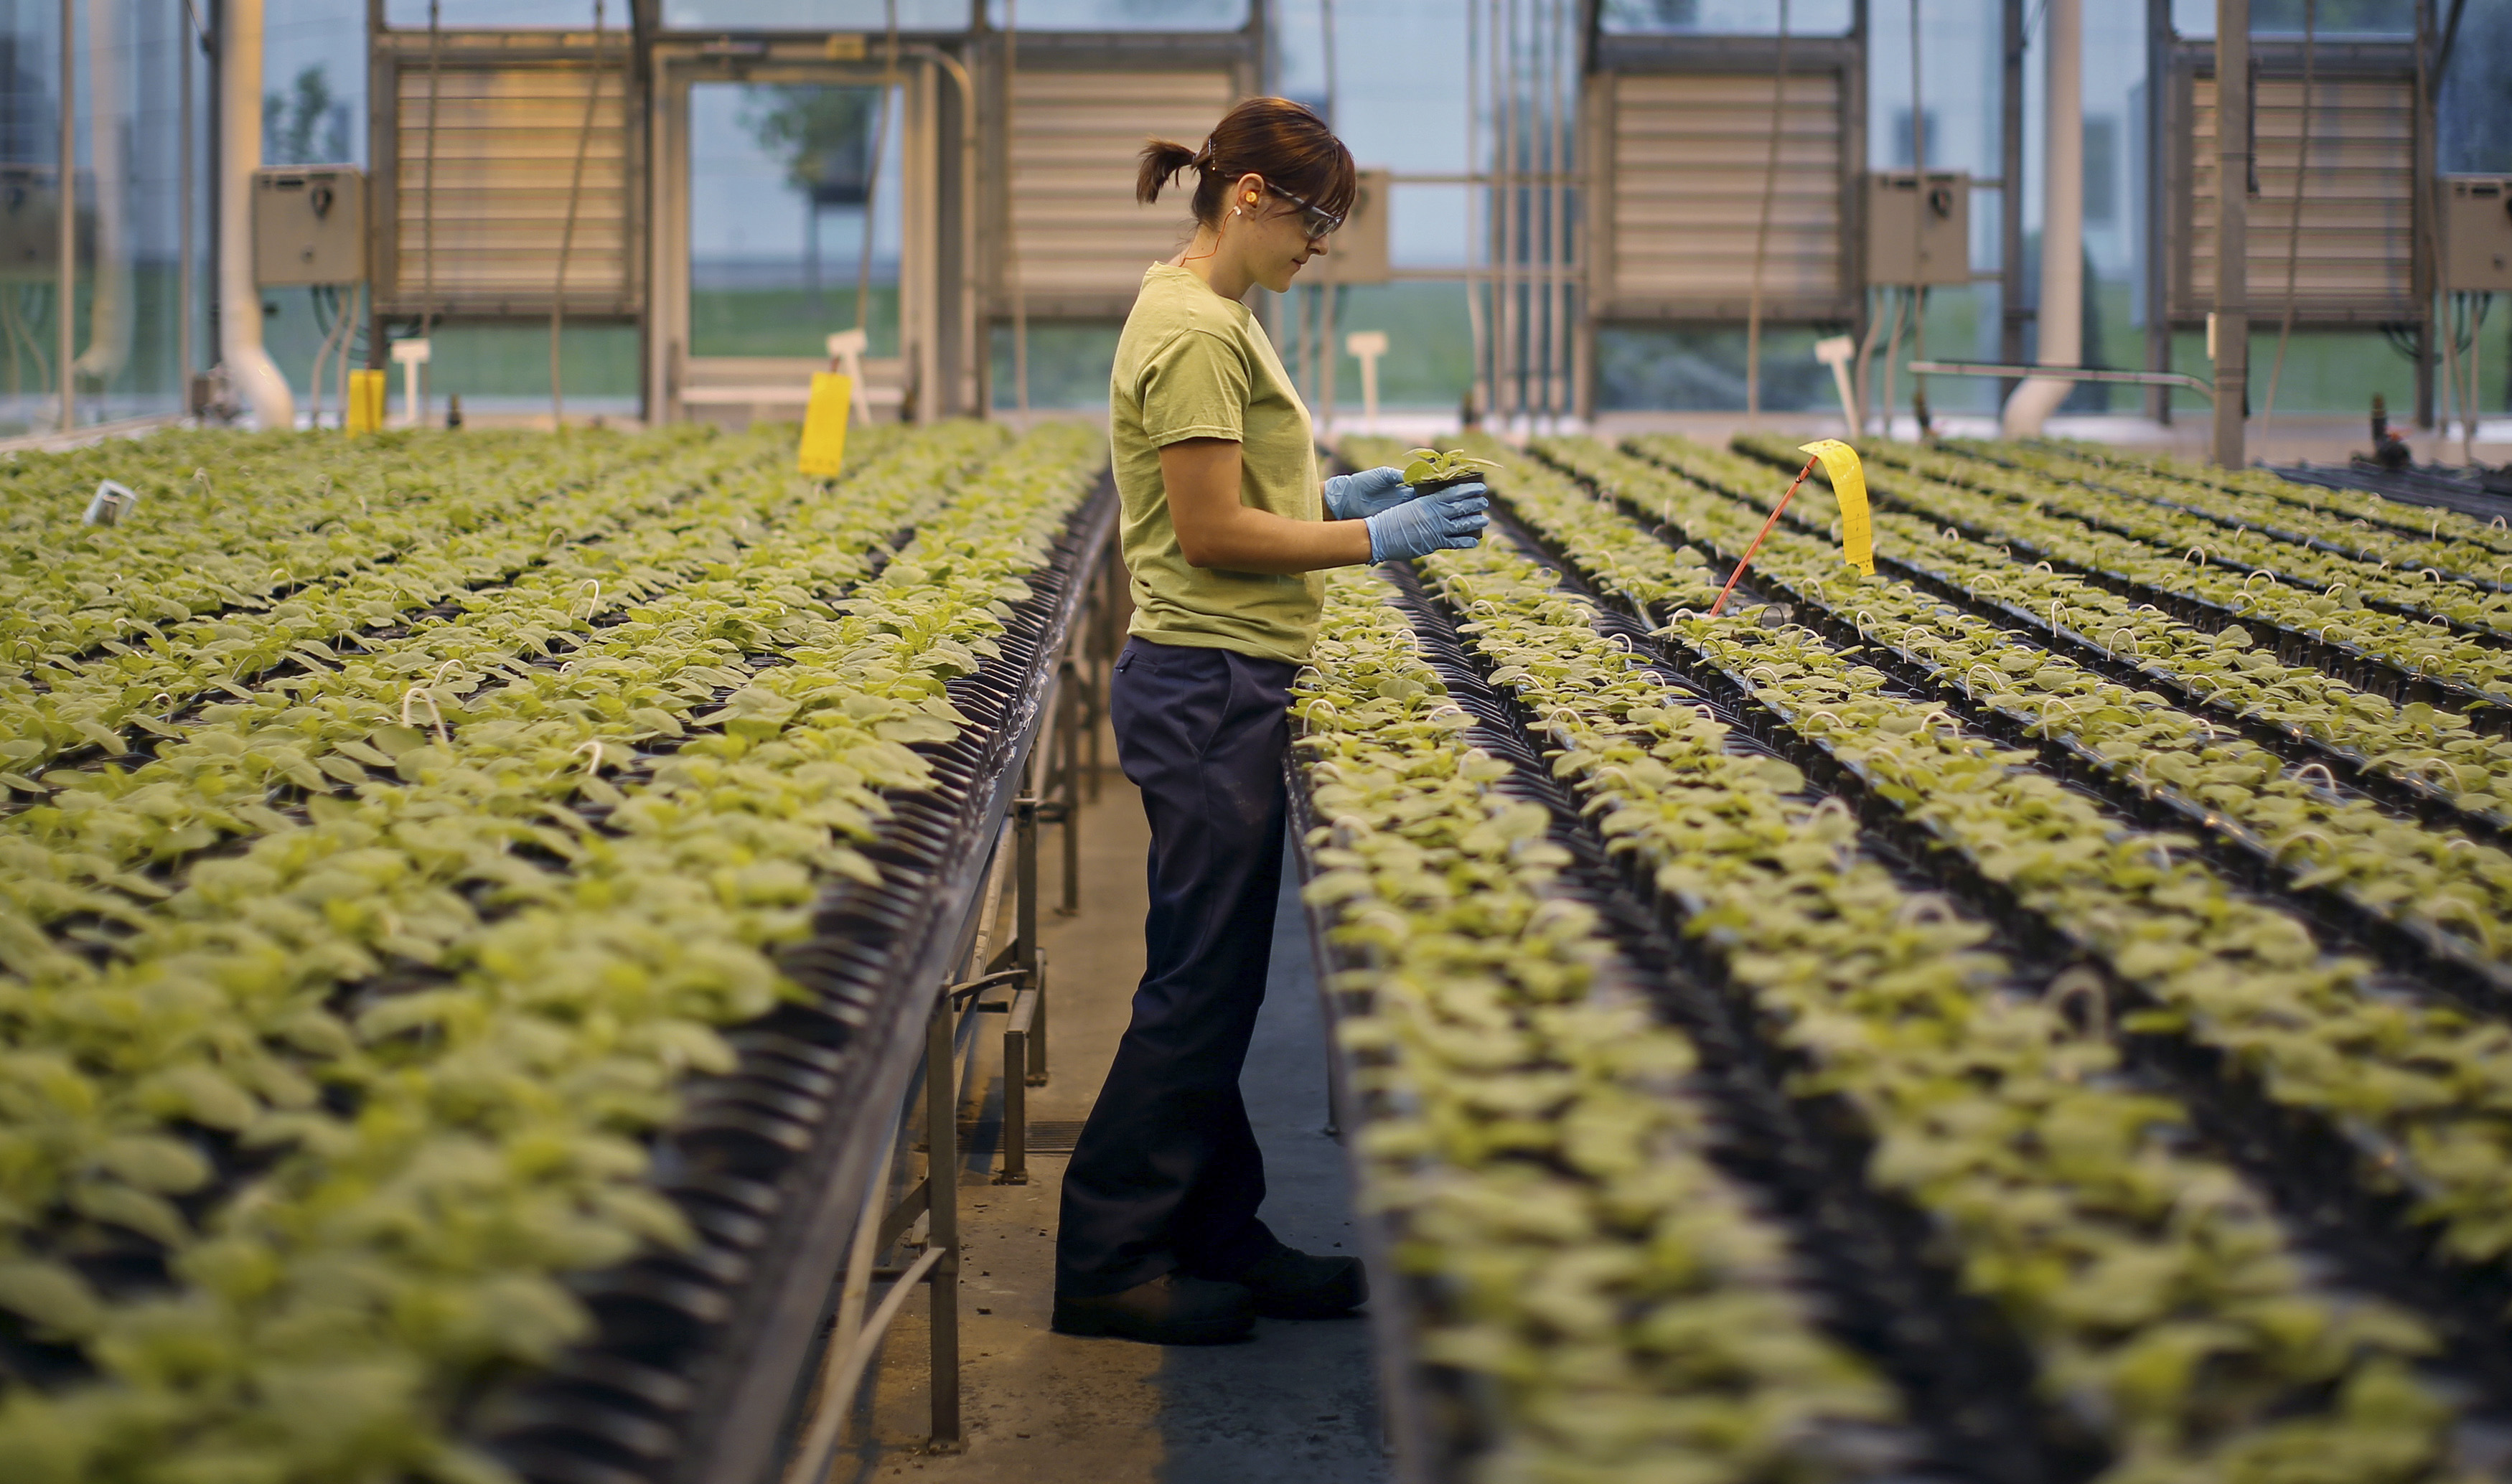 An worker inspects the Nicotiana benthamiana plants at Medicago greenhouse in Quebec City, August 13, 2014. REUTERS/Mathieu Belanger